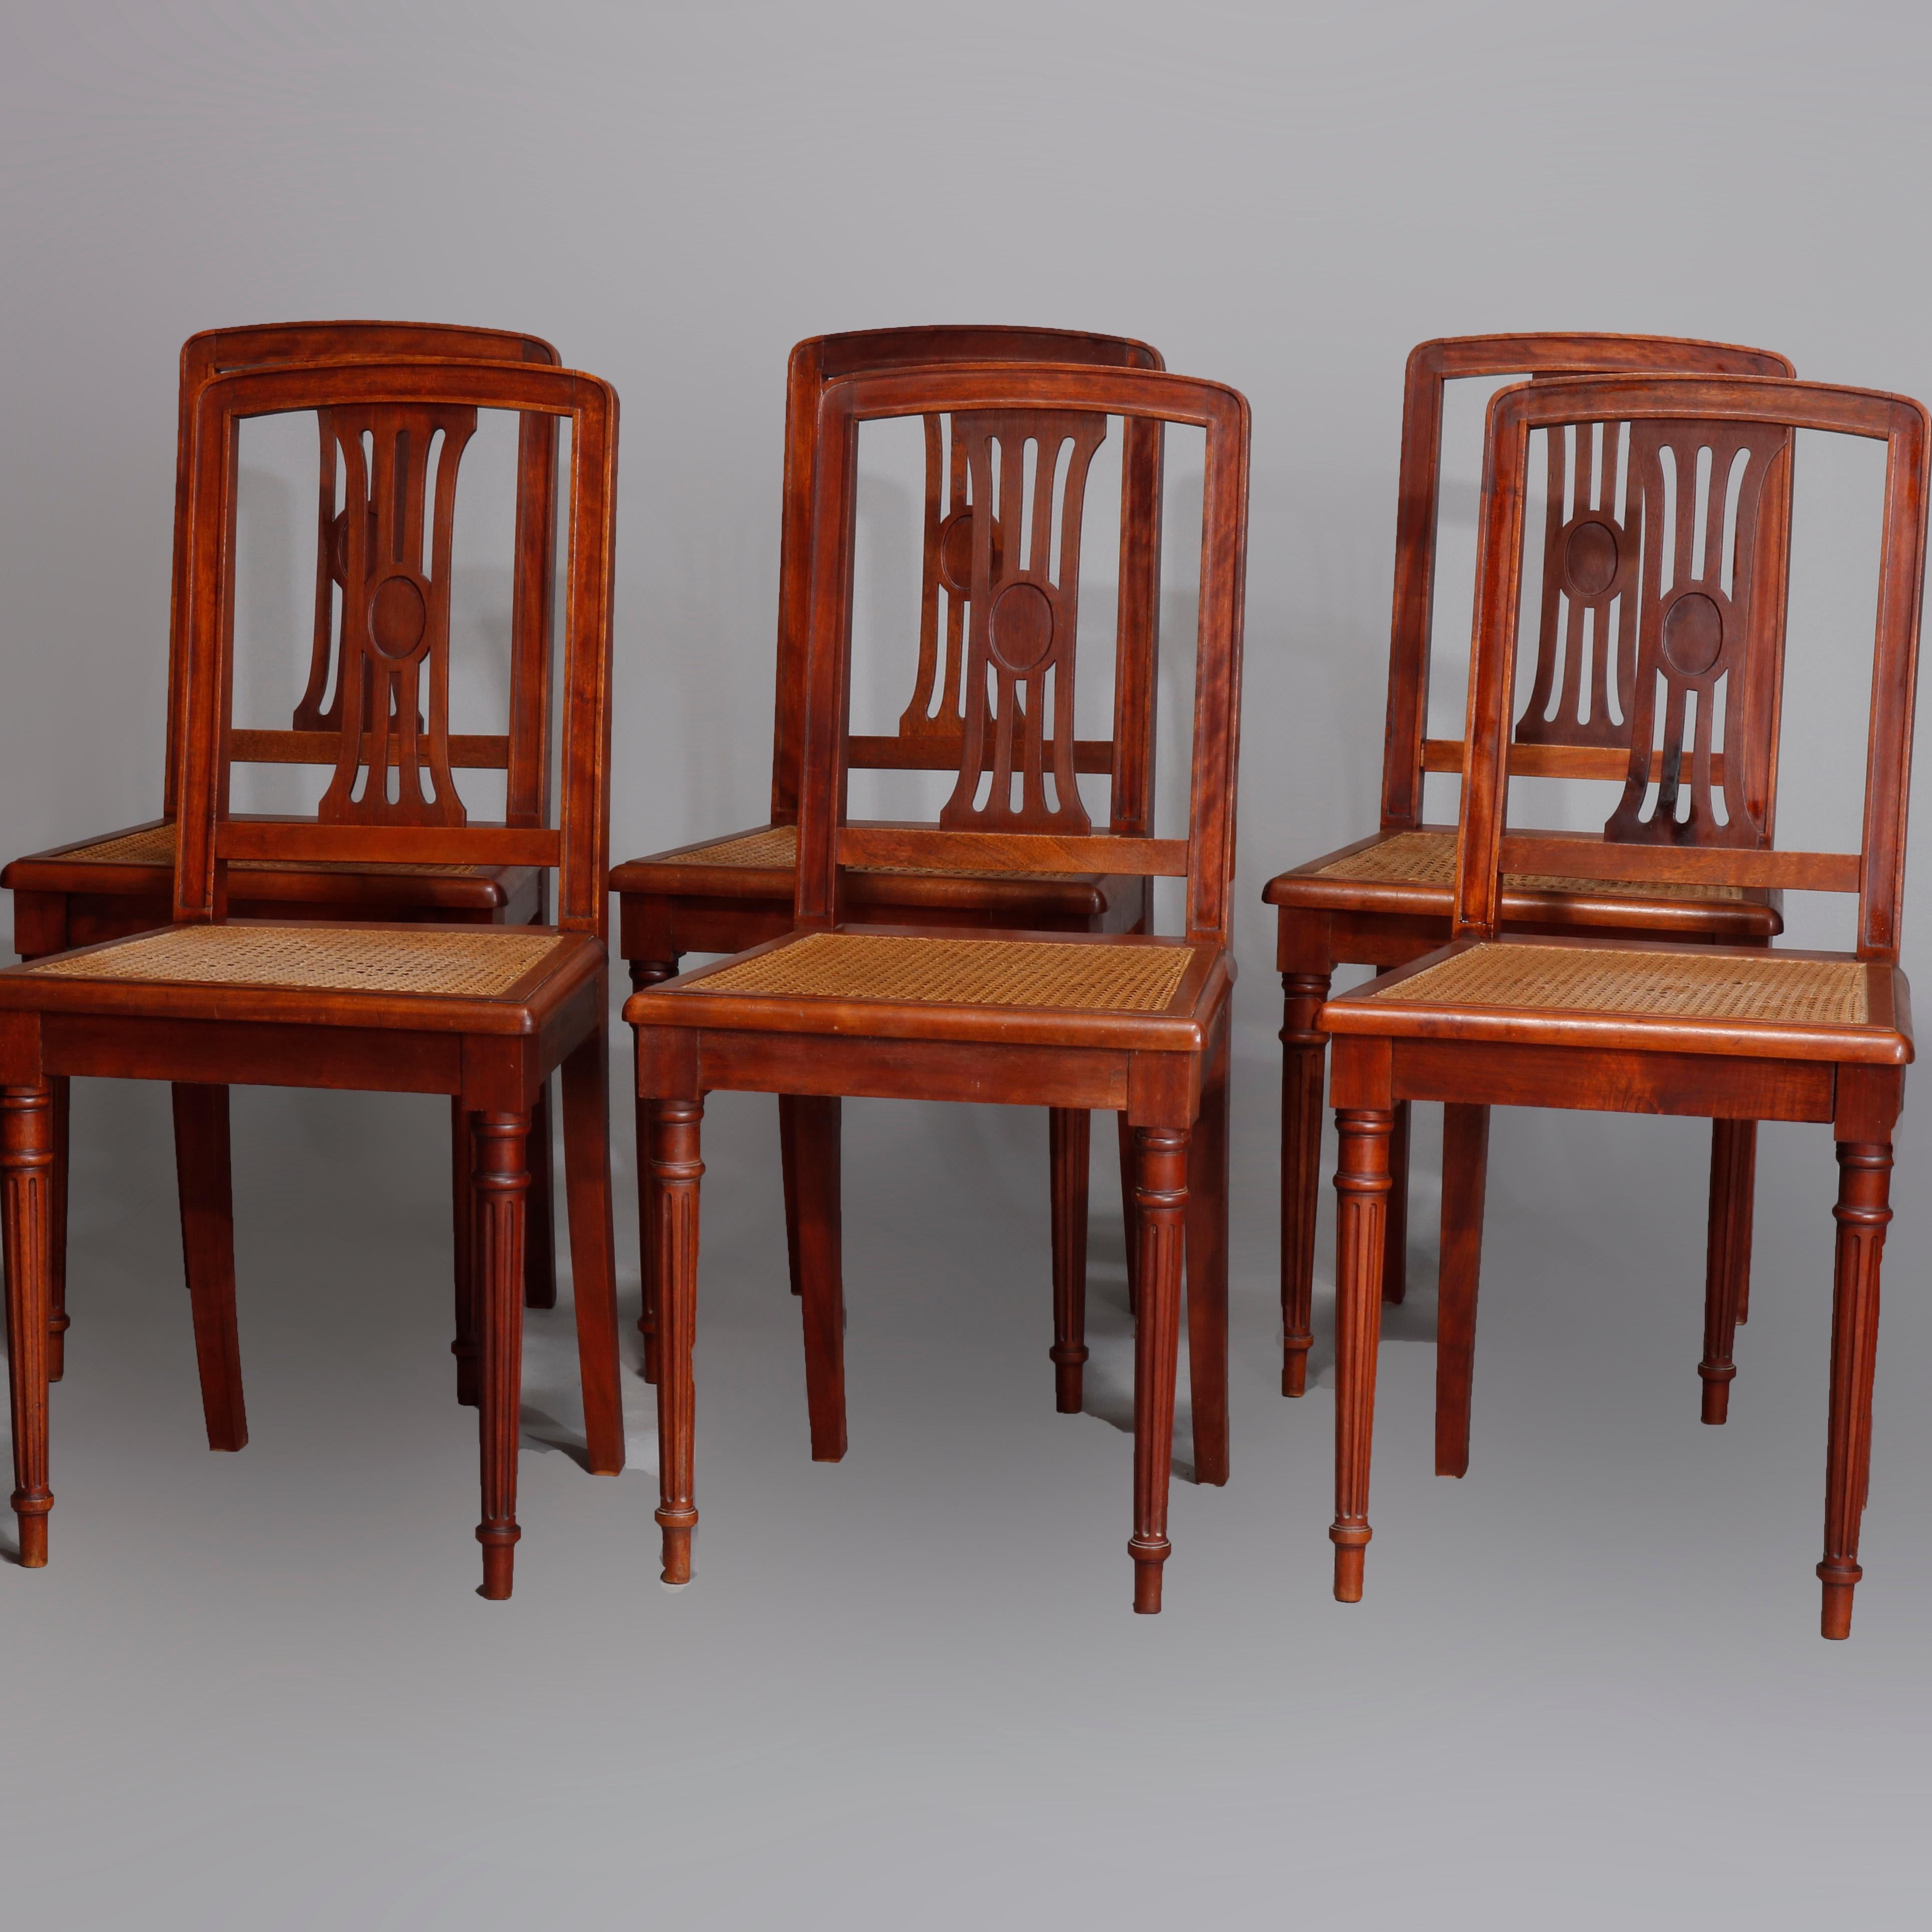 Six Antique French Louis XVI Mahogany Cane Seat Chairs, Early 20th Century In Good Condition For Sale In Big Flats, NY